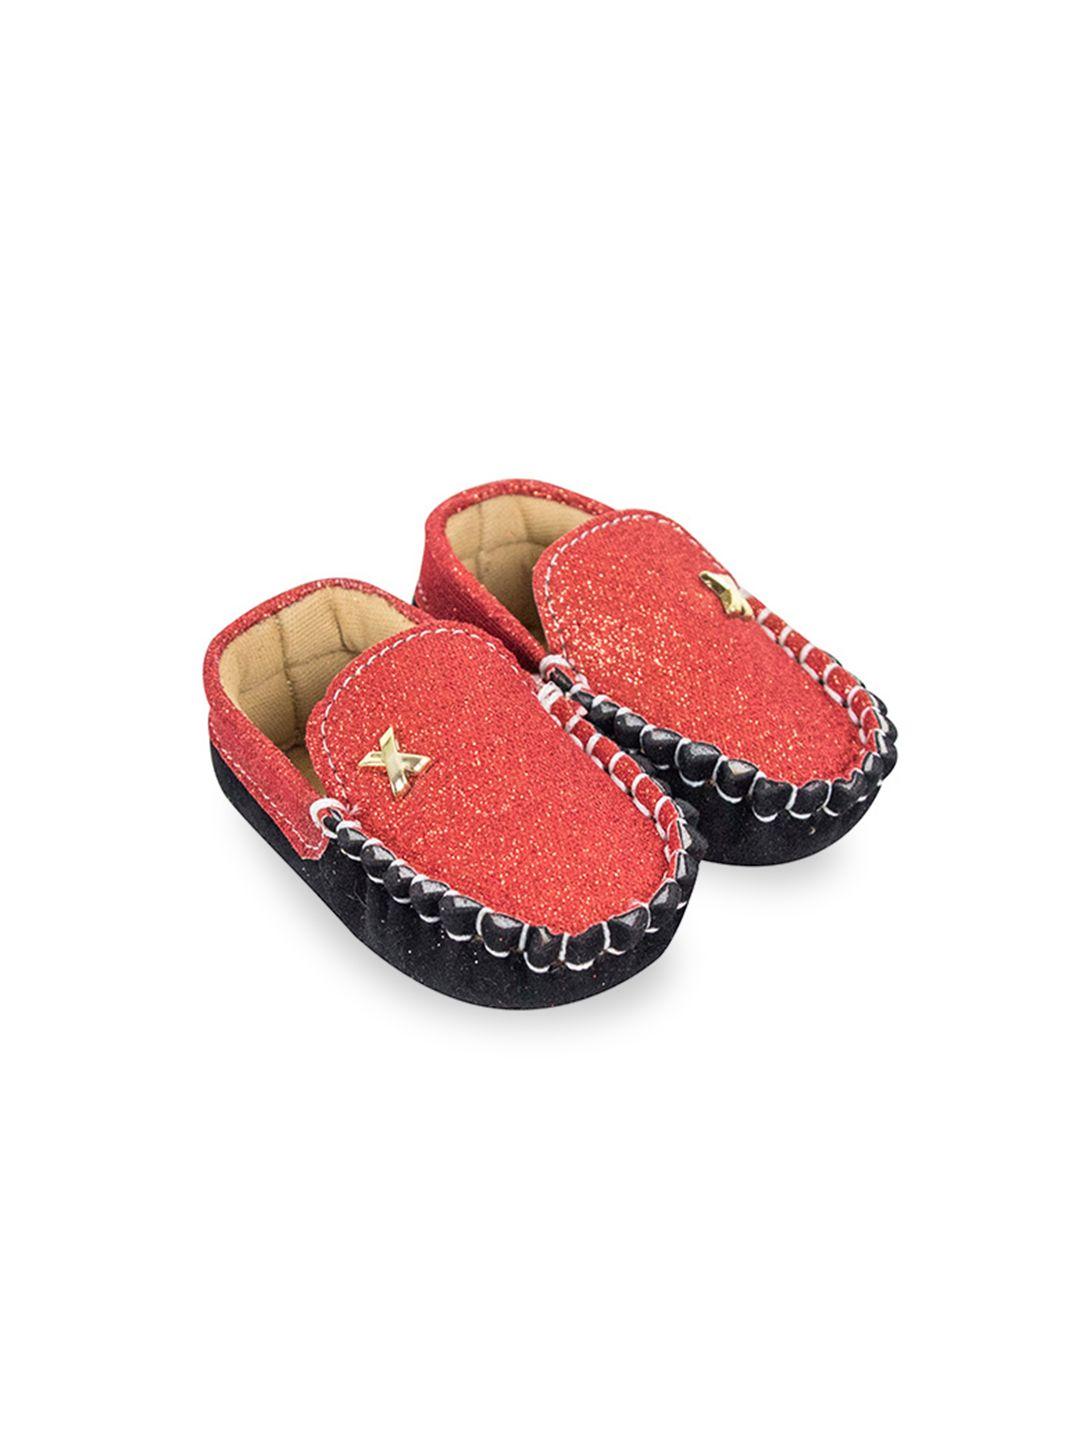 baesd infants loafer booties